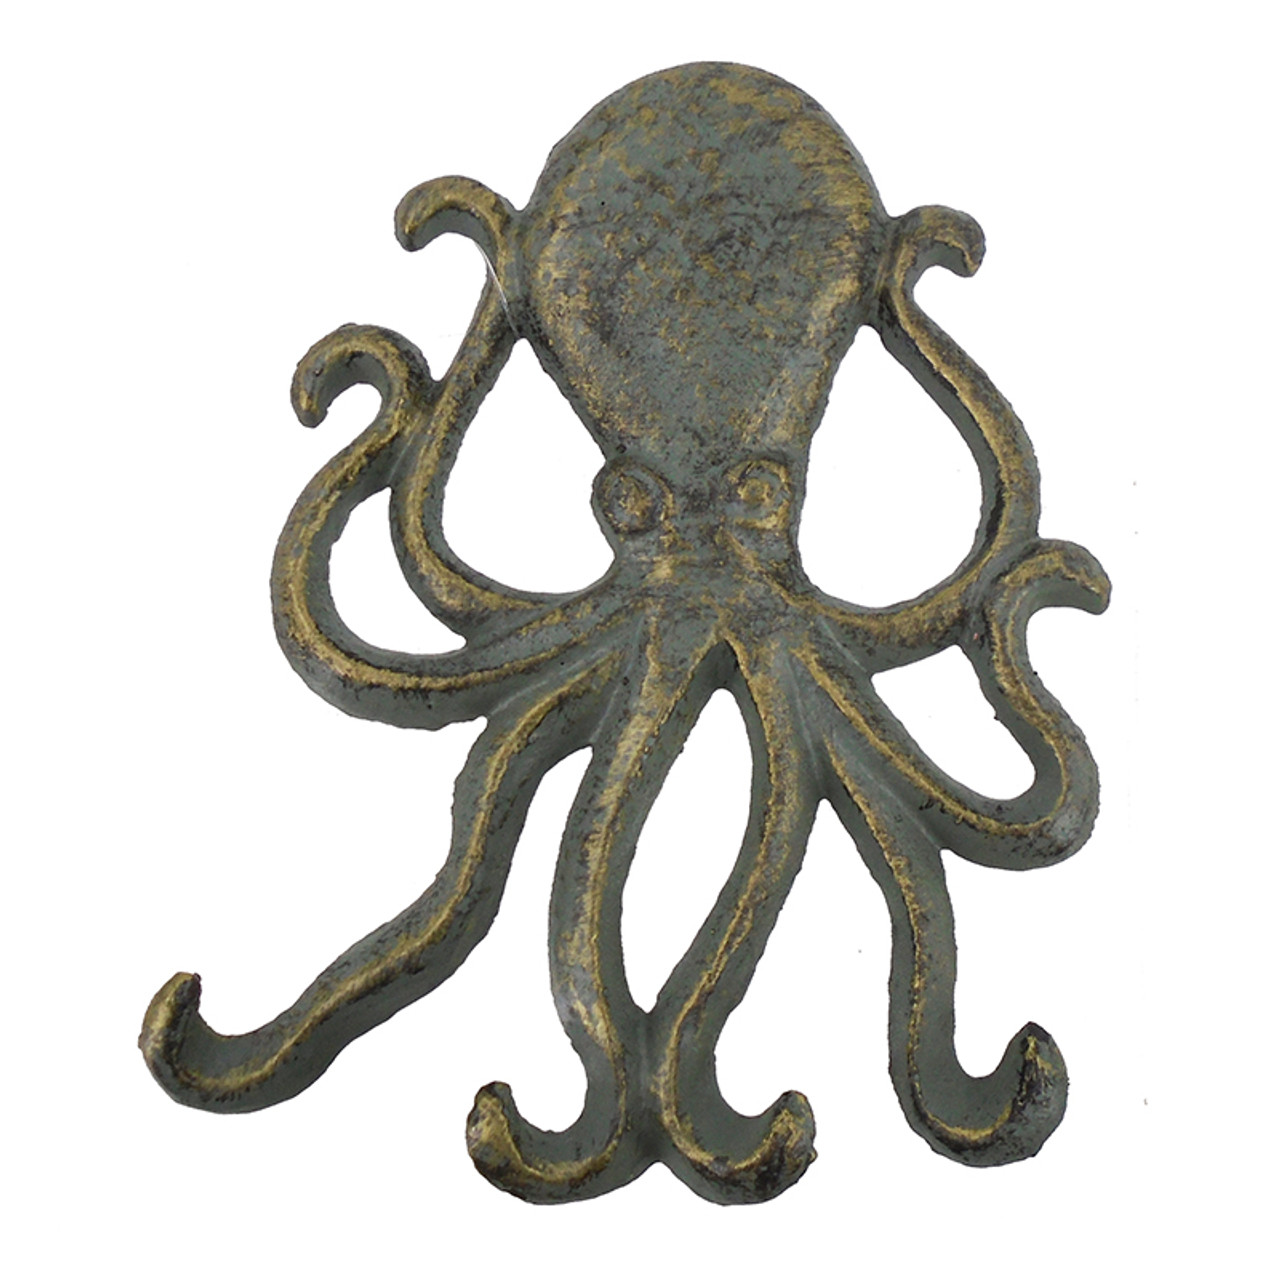 Heavy Duty 6 Tentacles Octopus Key Holder for Wall Cast Iron Clothes Hooks  Decorative Rustic Towel Hook with Screws, Rustic Metal Clothing Hanger